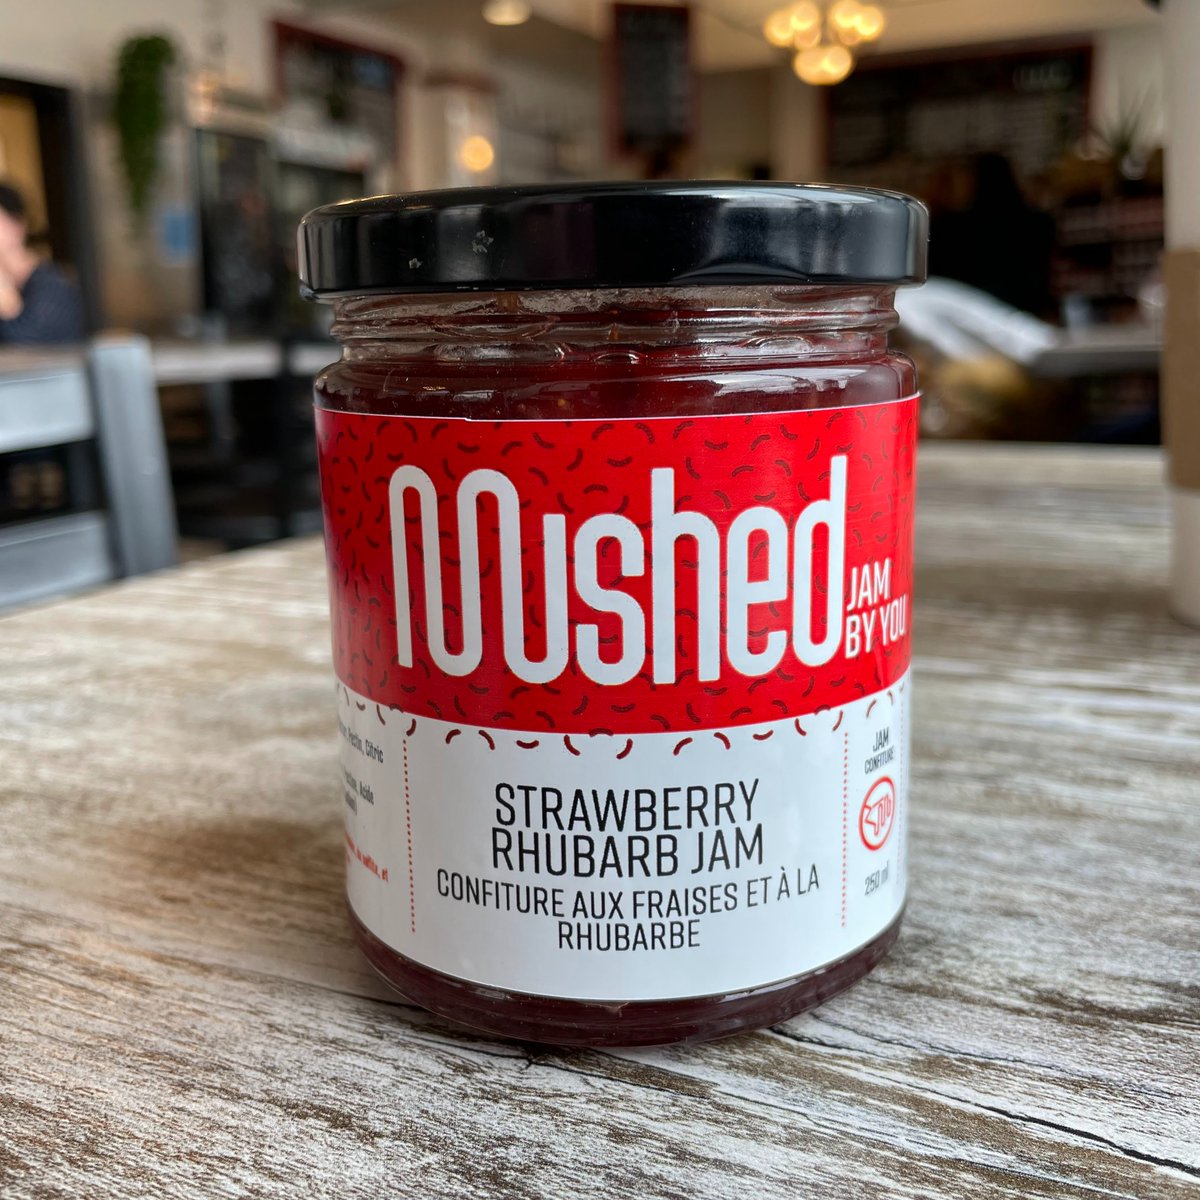 Mushed by YOU preserves are made right here 📍 #Youth trainees learn the ropes from start to finish, gaining invaluable skills to build confidence in the workplace. Find selected #MushedbyYOU products at local @FarmBoy stores: bit.ly/4410hro #ldnont #ontariomade